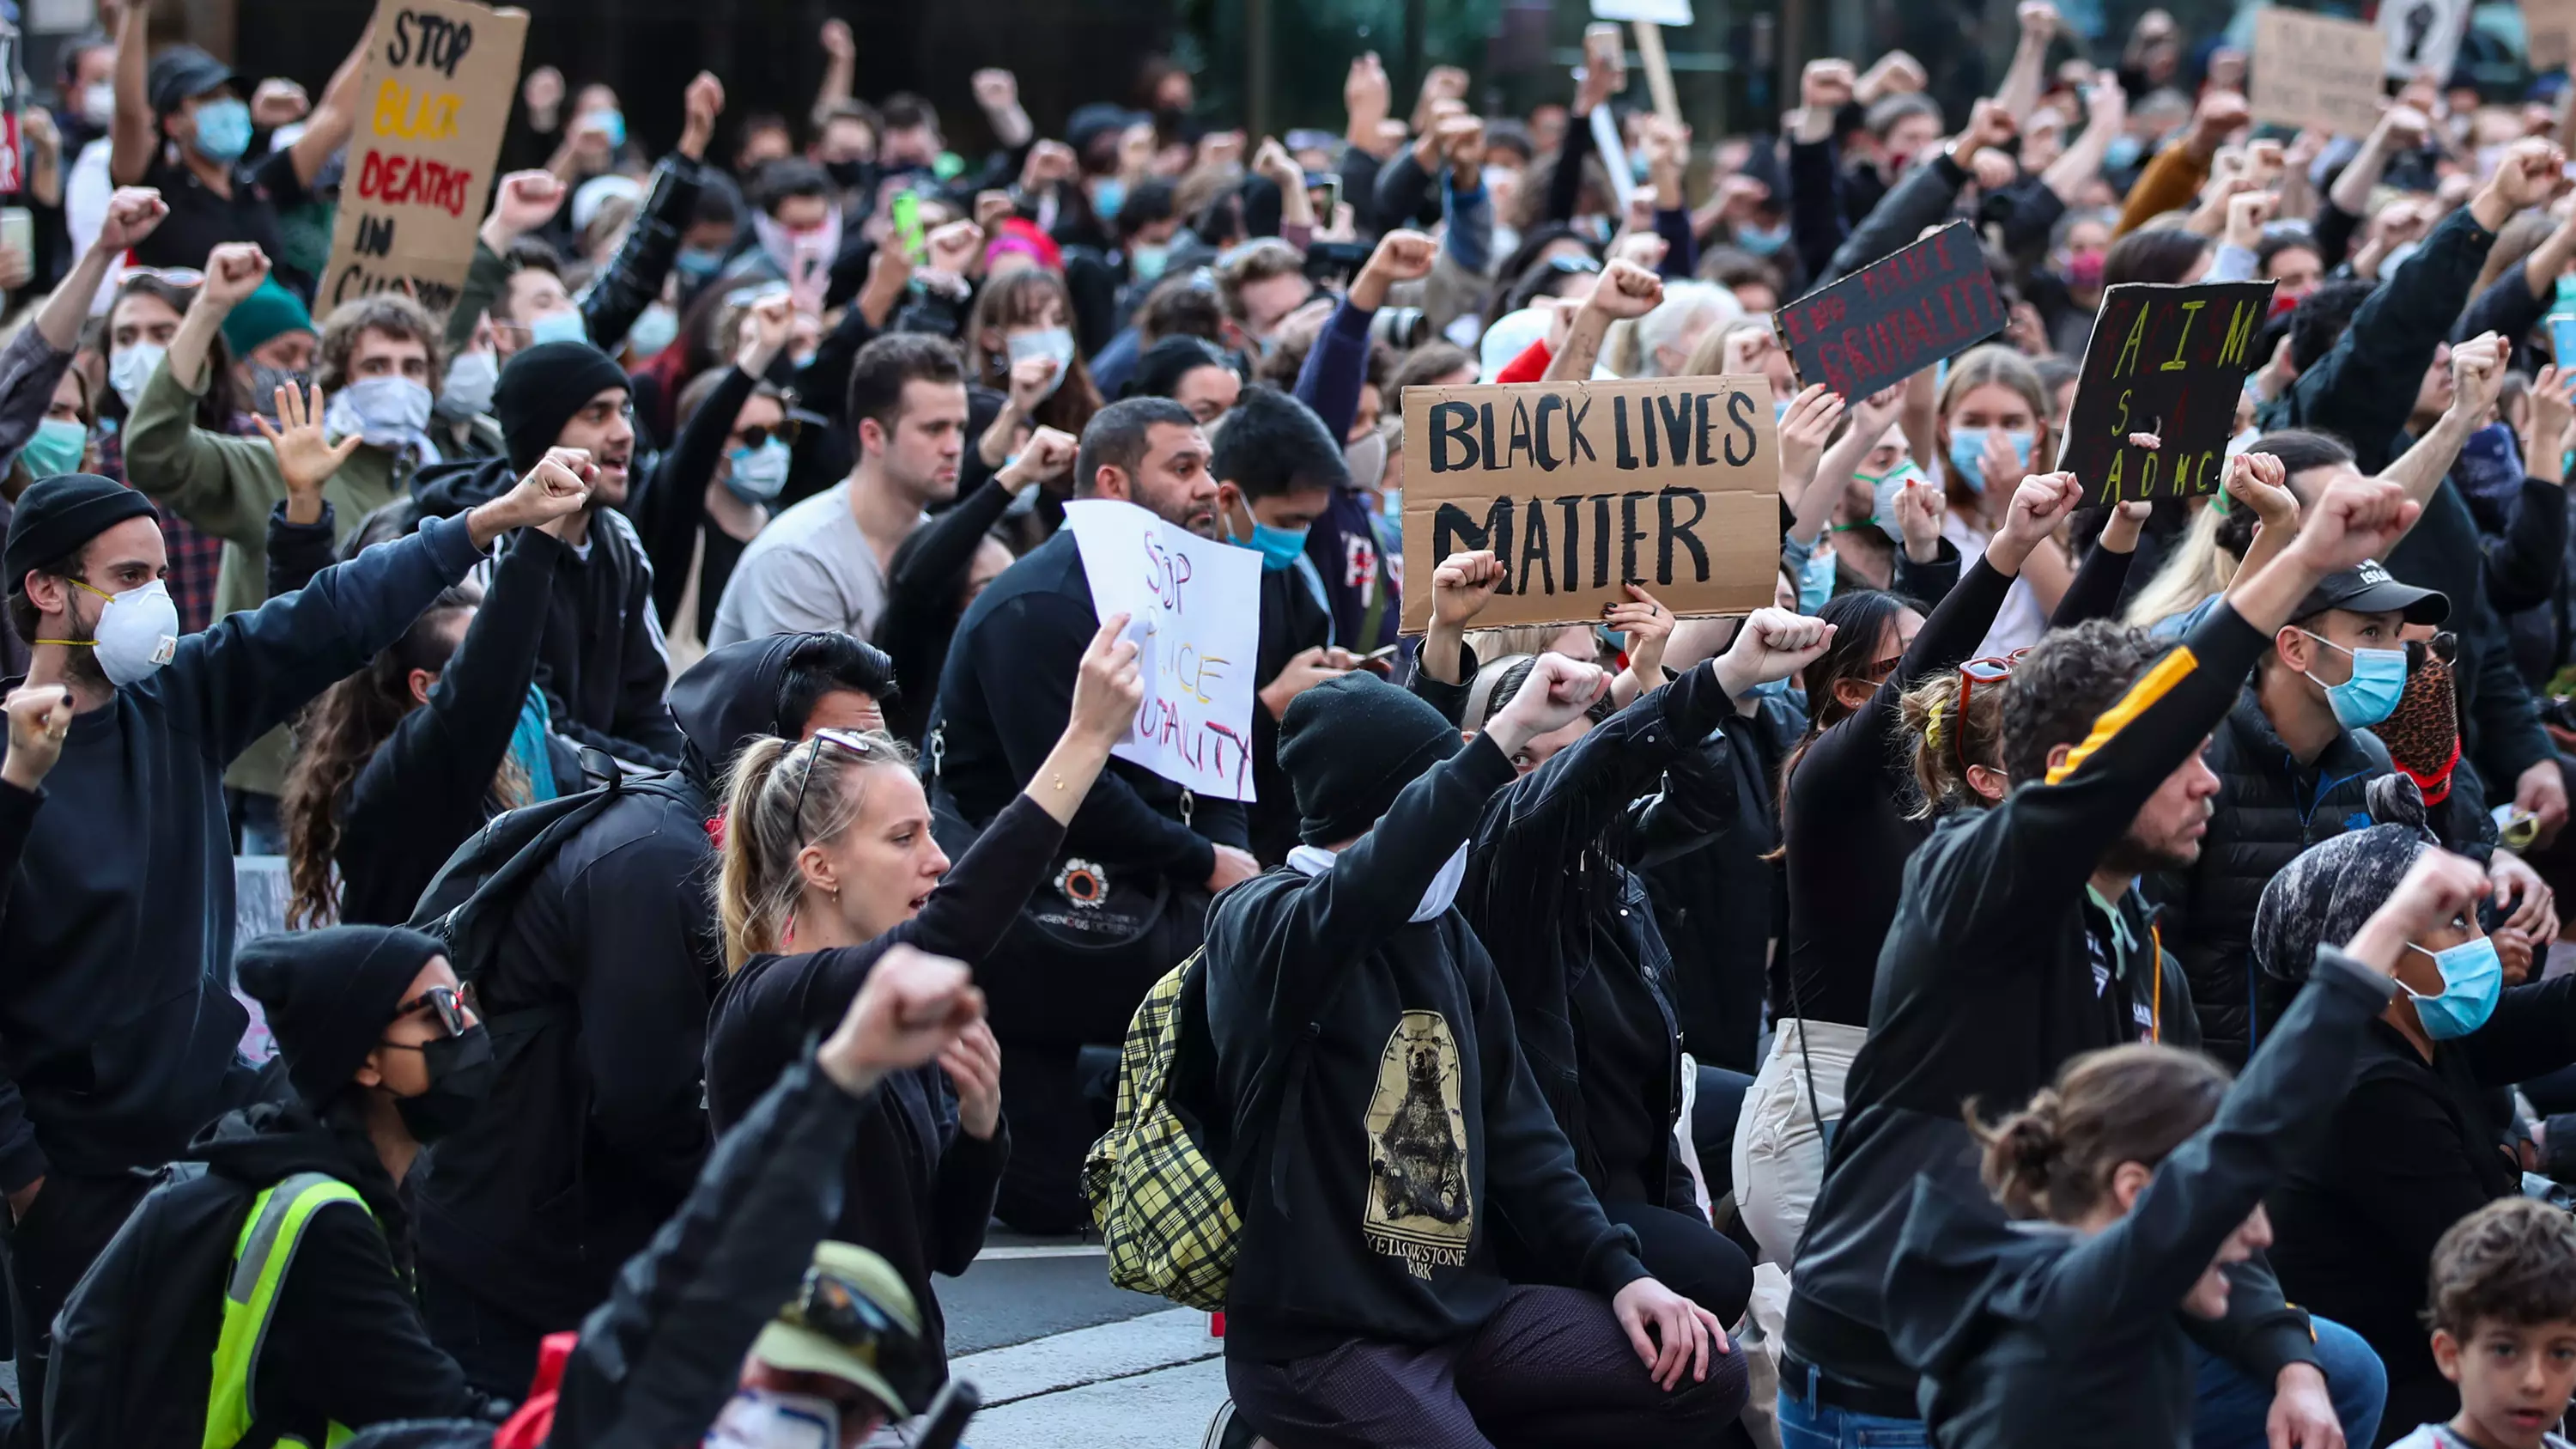 Expert Says No Coronavirus Cases Have Been Traced To Australian Black Lives Matter Protests